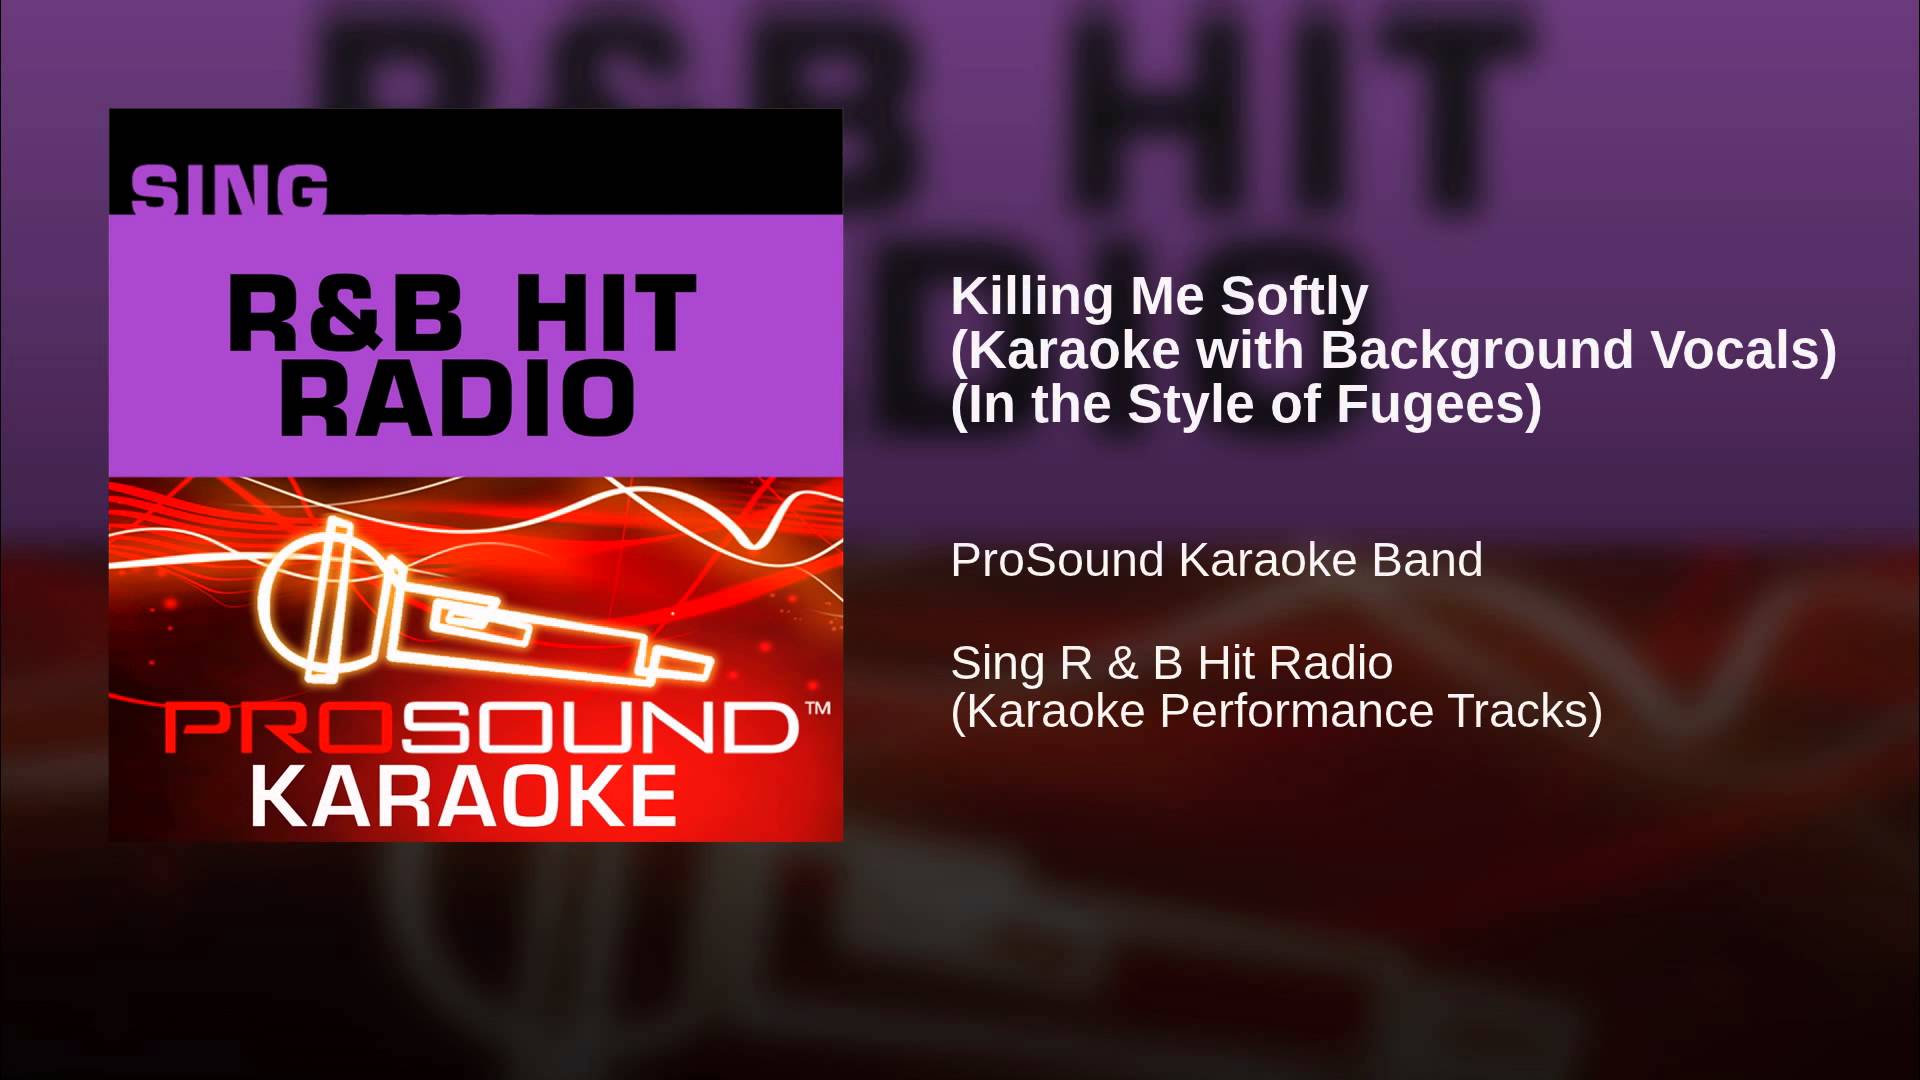 Killing Me Softly (Karaoke with Background Vocals) (In the Style